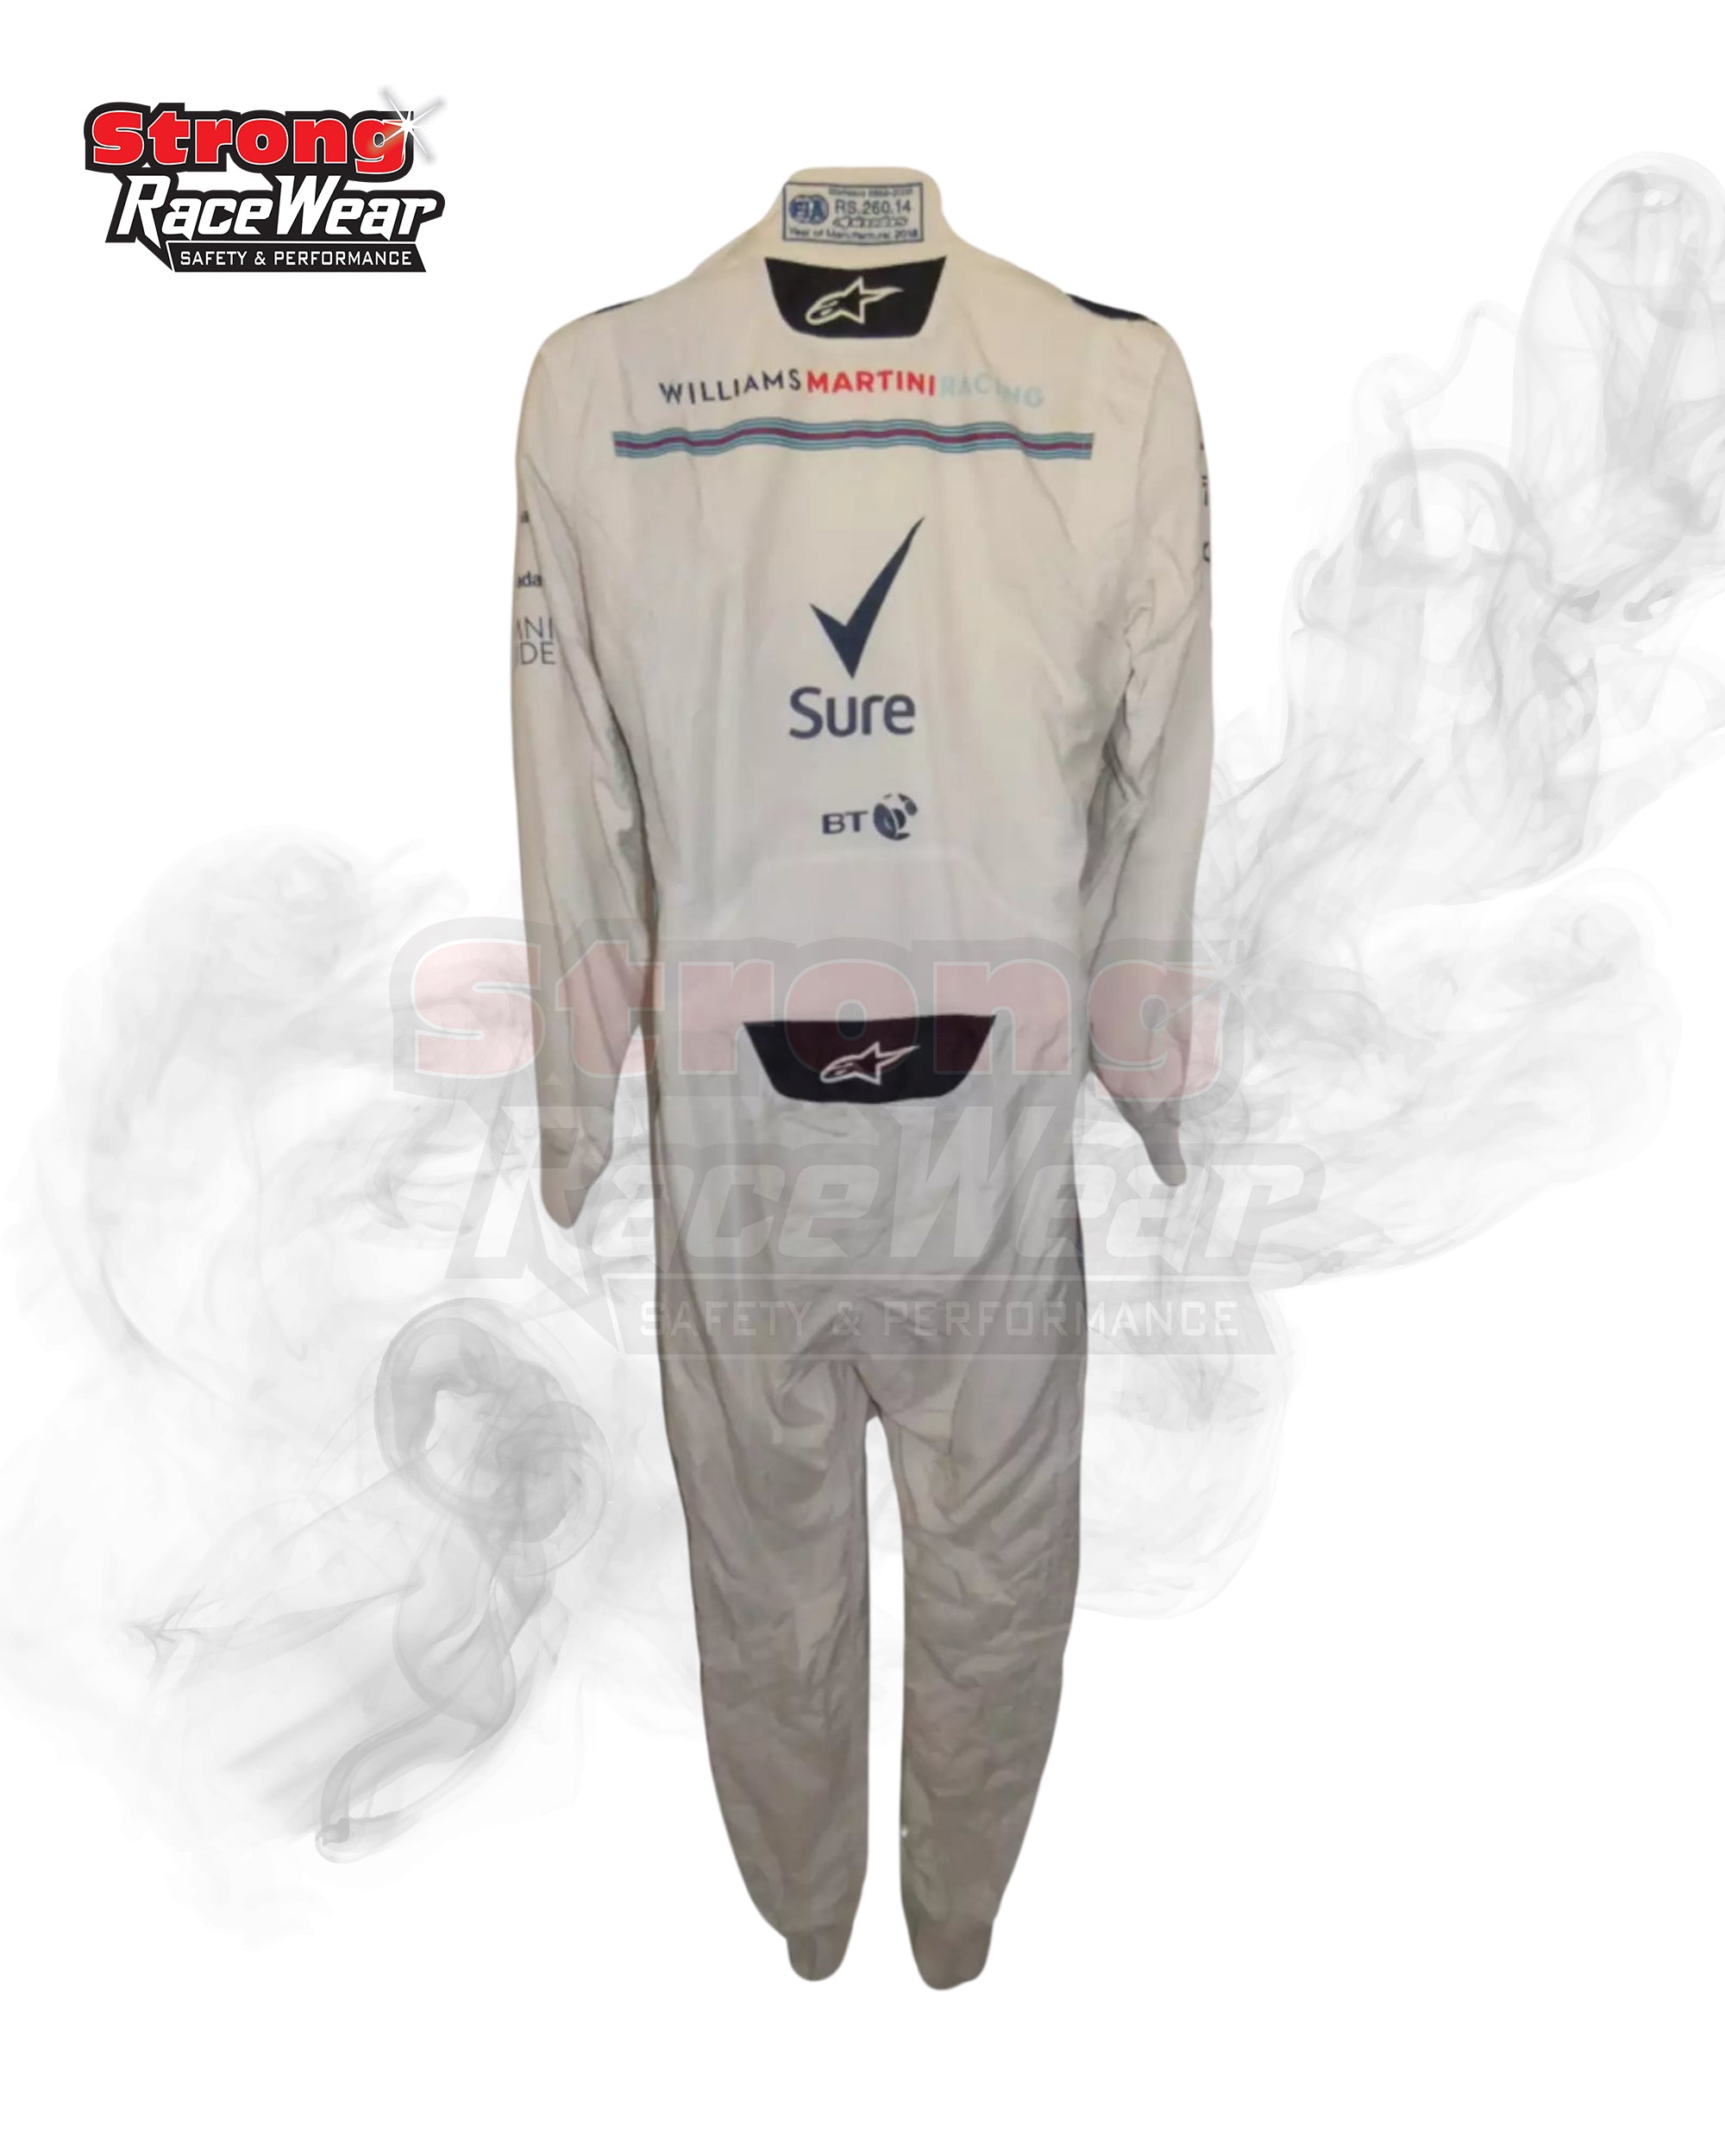 Lance Stroll Signed 2018 Williams Martini Race Suit